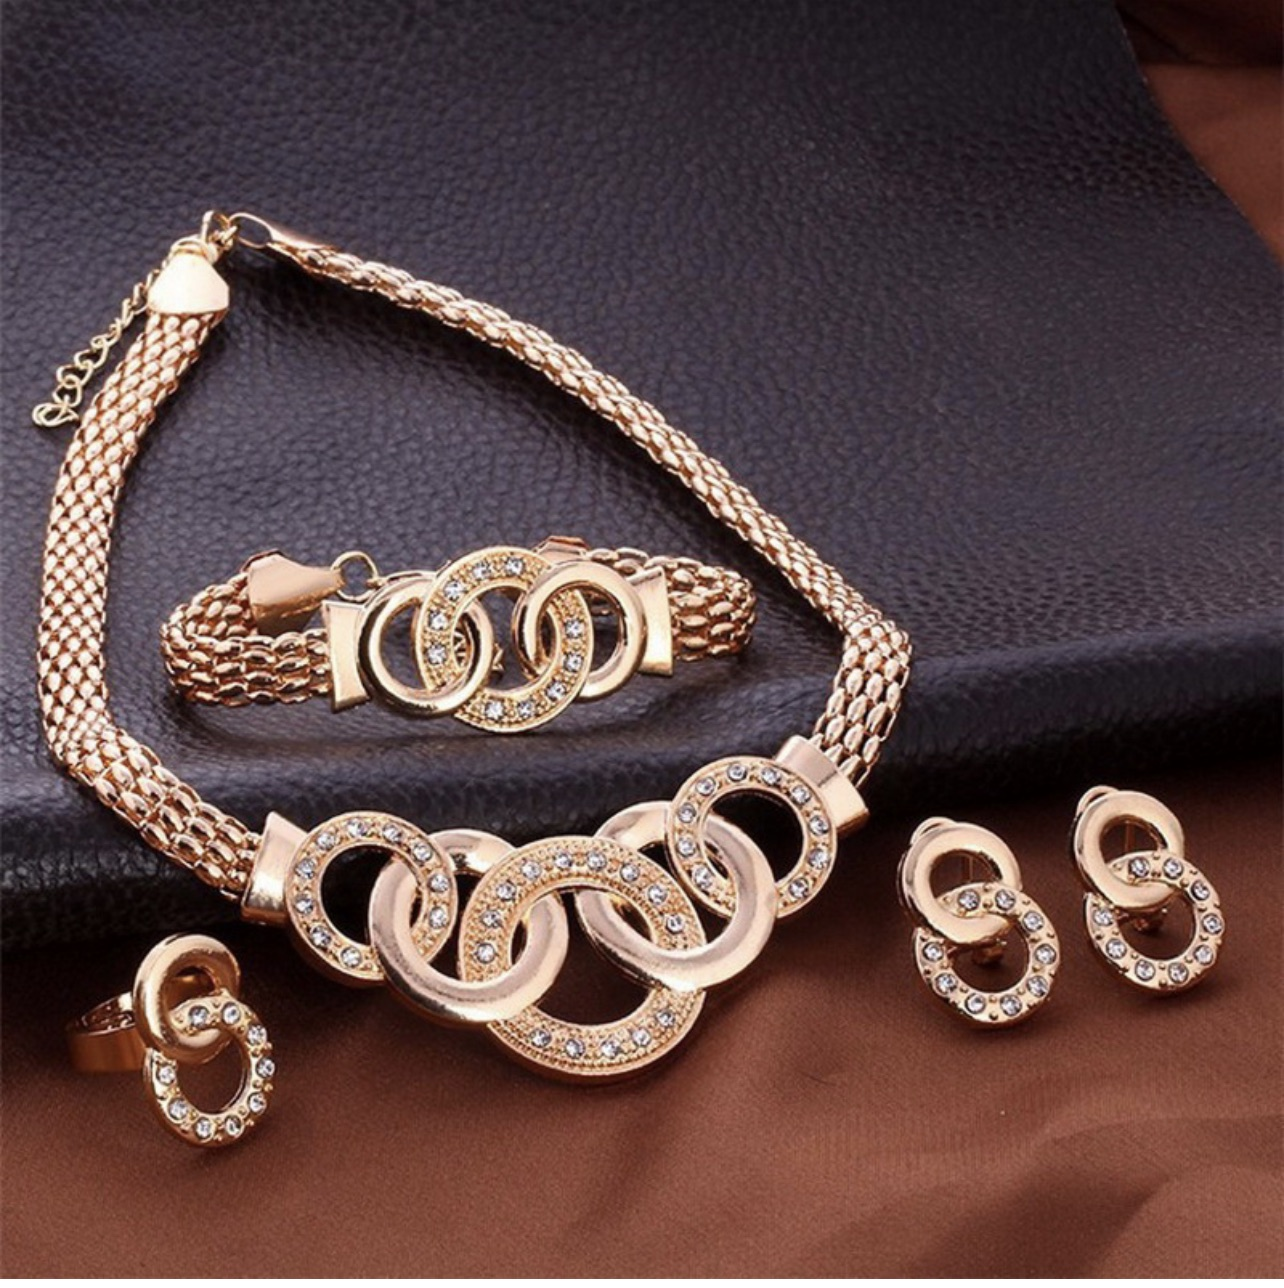 Chained In Fashion Jewelry Set